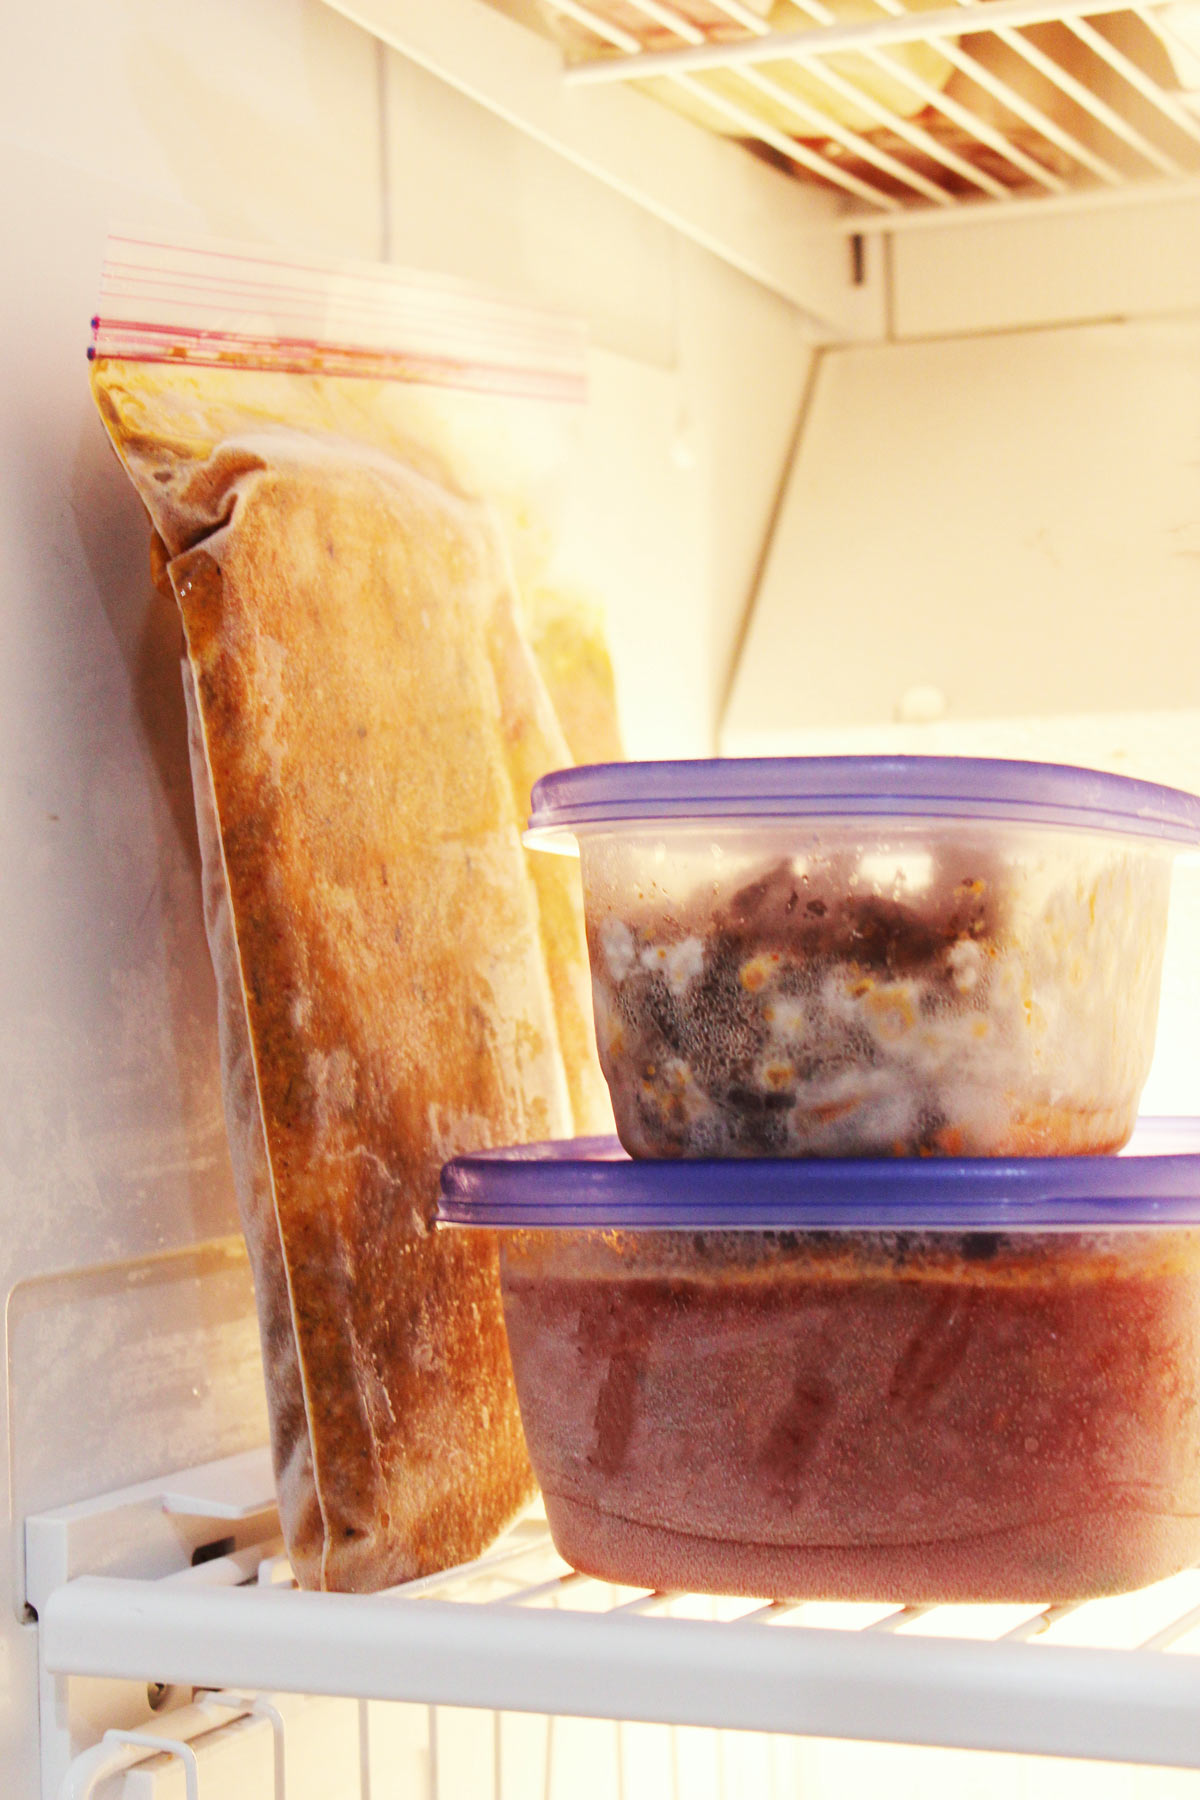 bagged freezer meal leaning against side of freezer wall next to stacked plastic containers of food on freezer shelf.